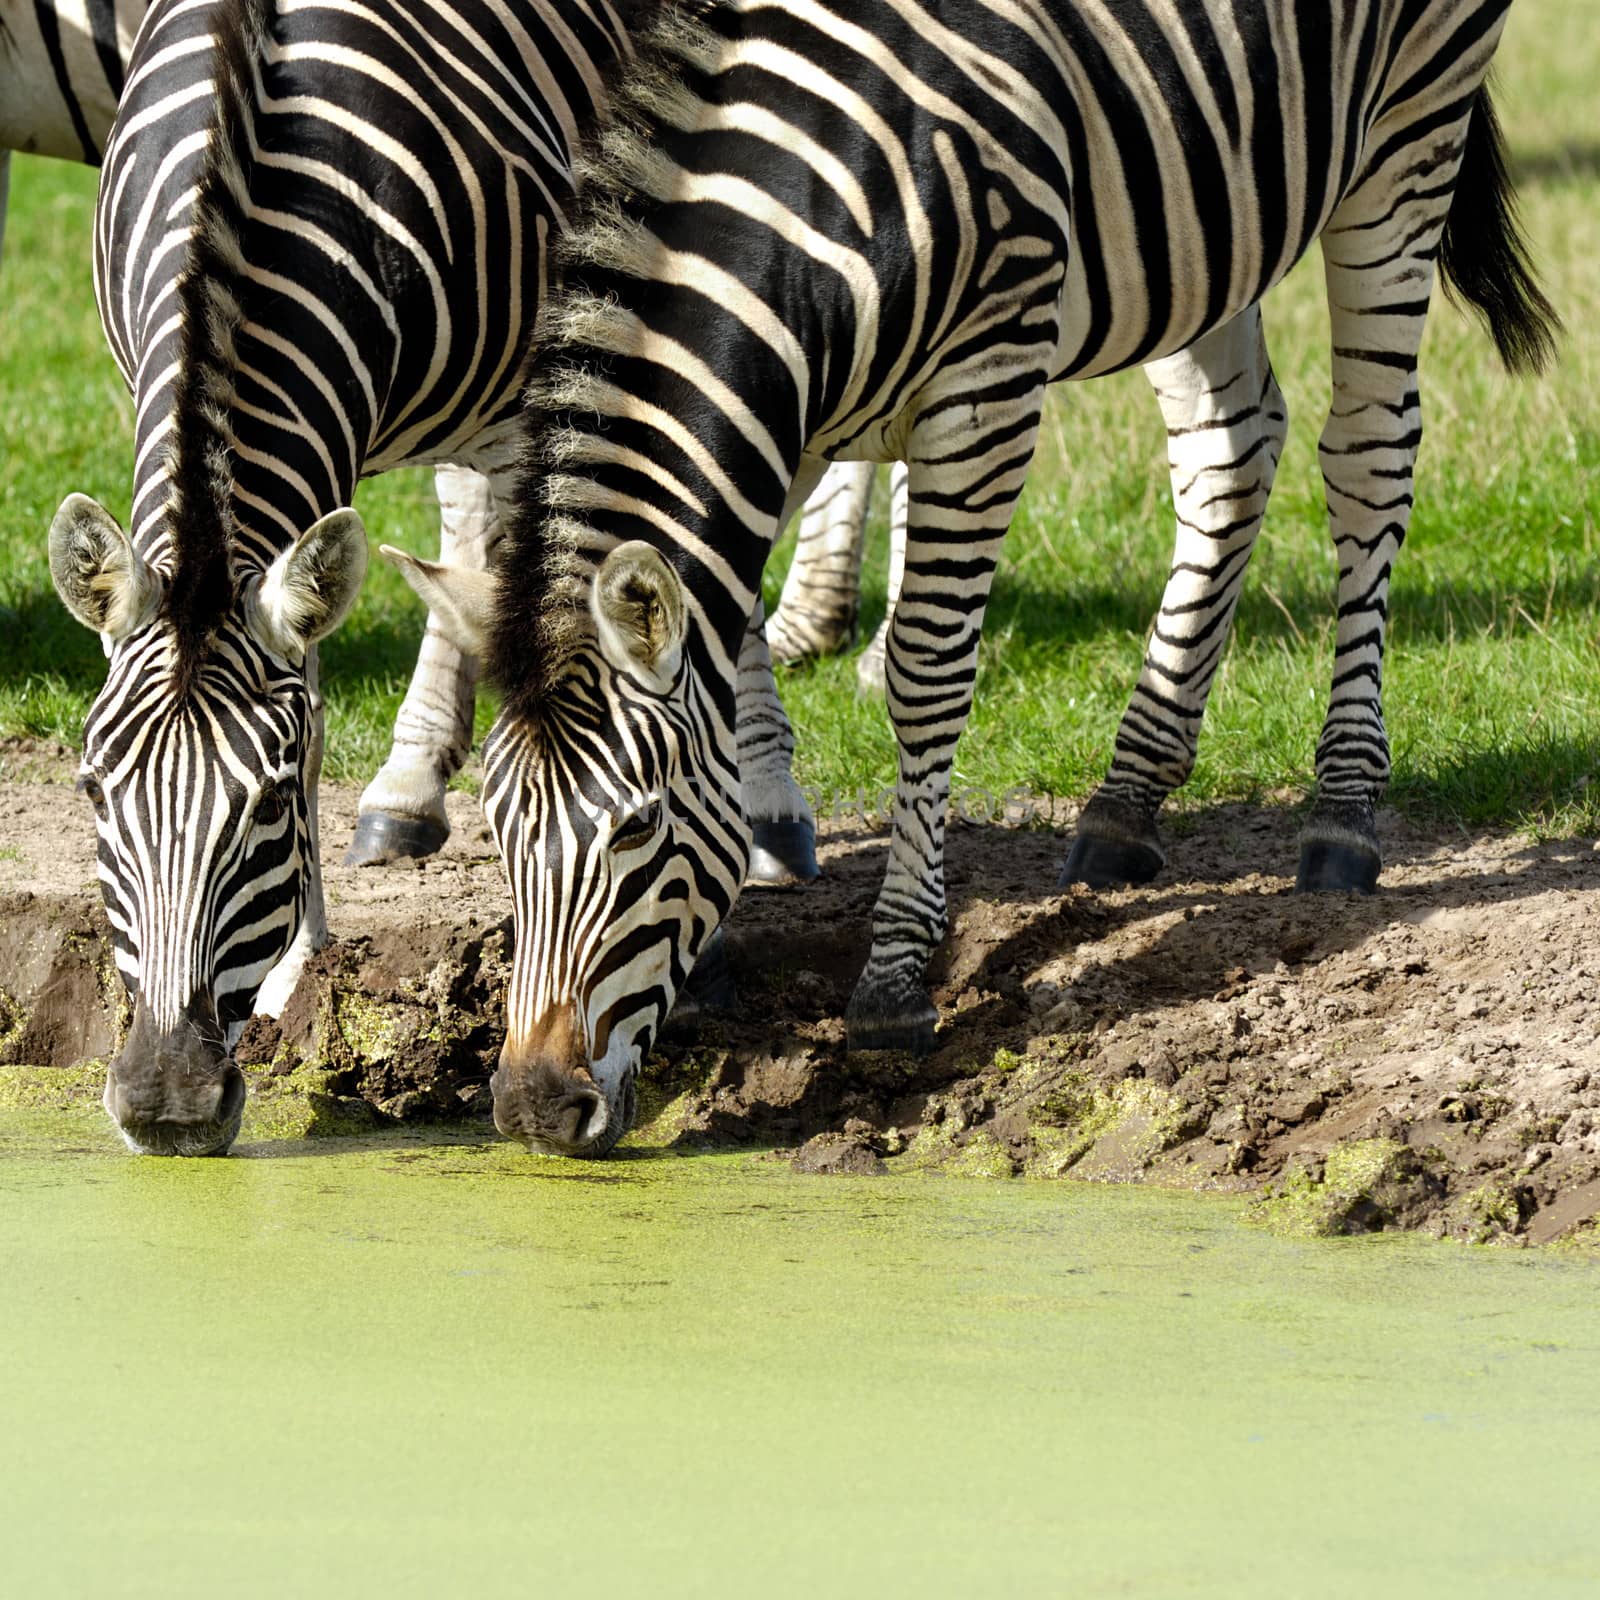 Two zebras are dinkning water from lake.